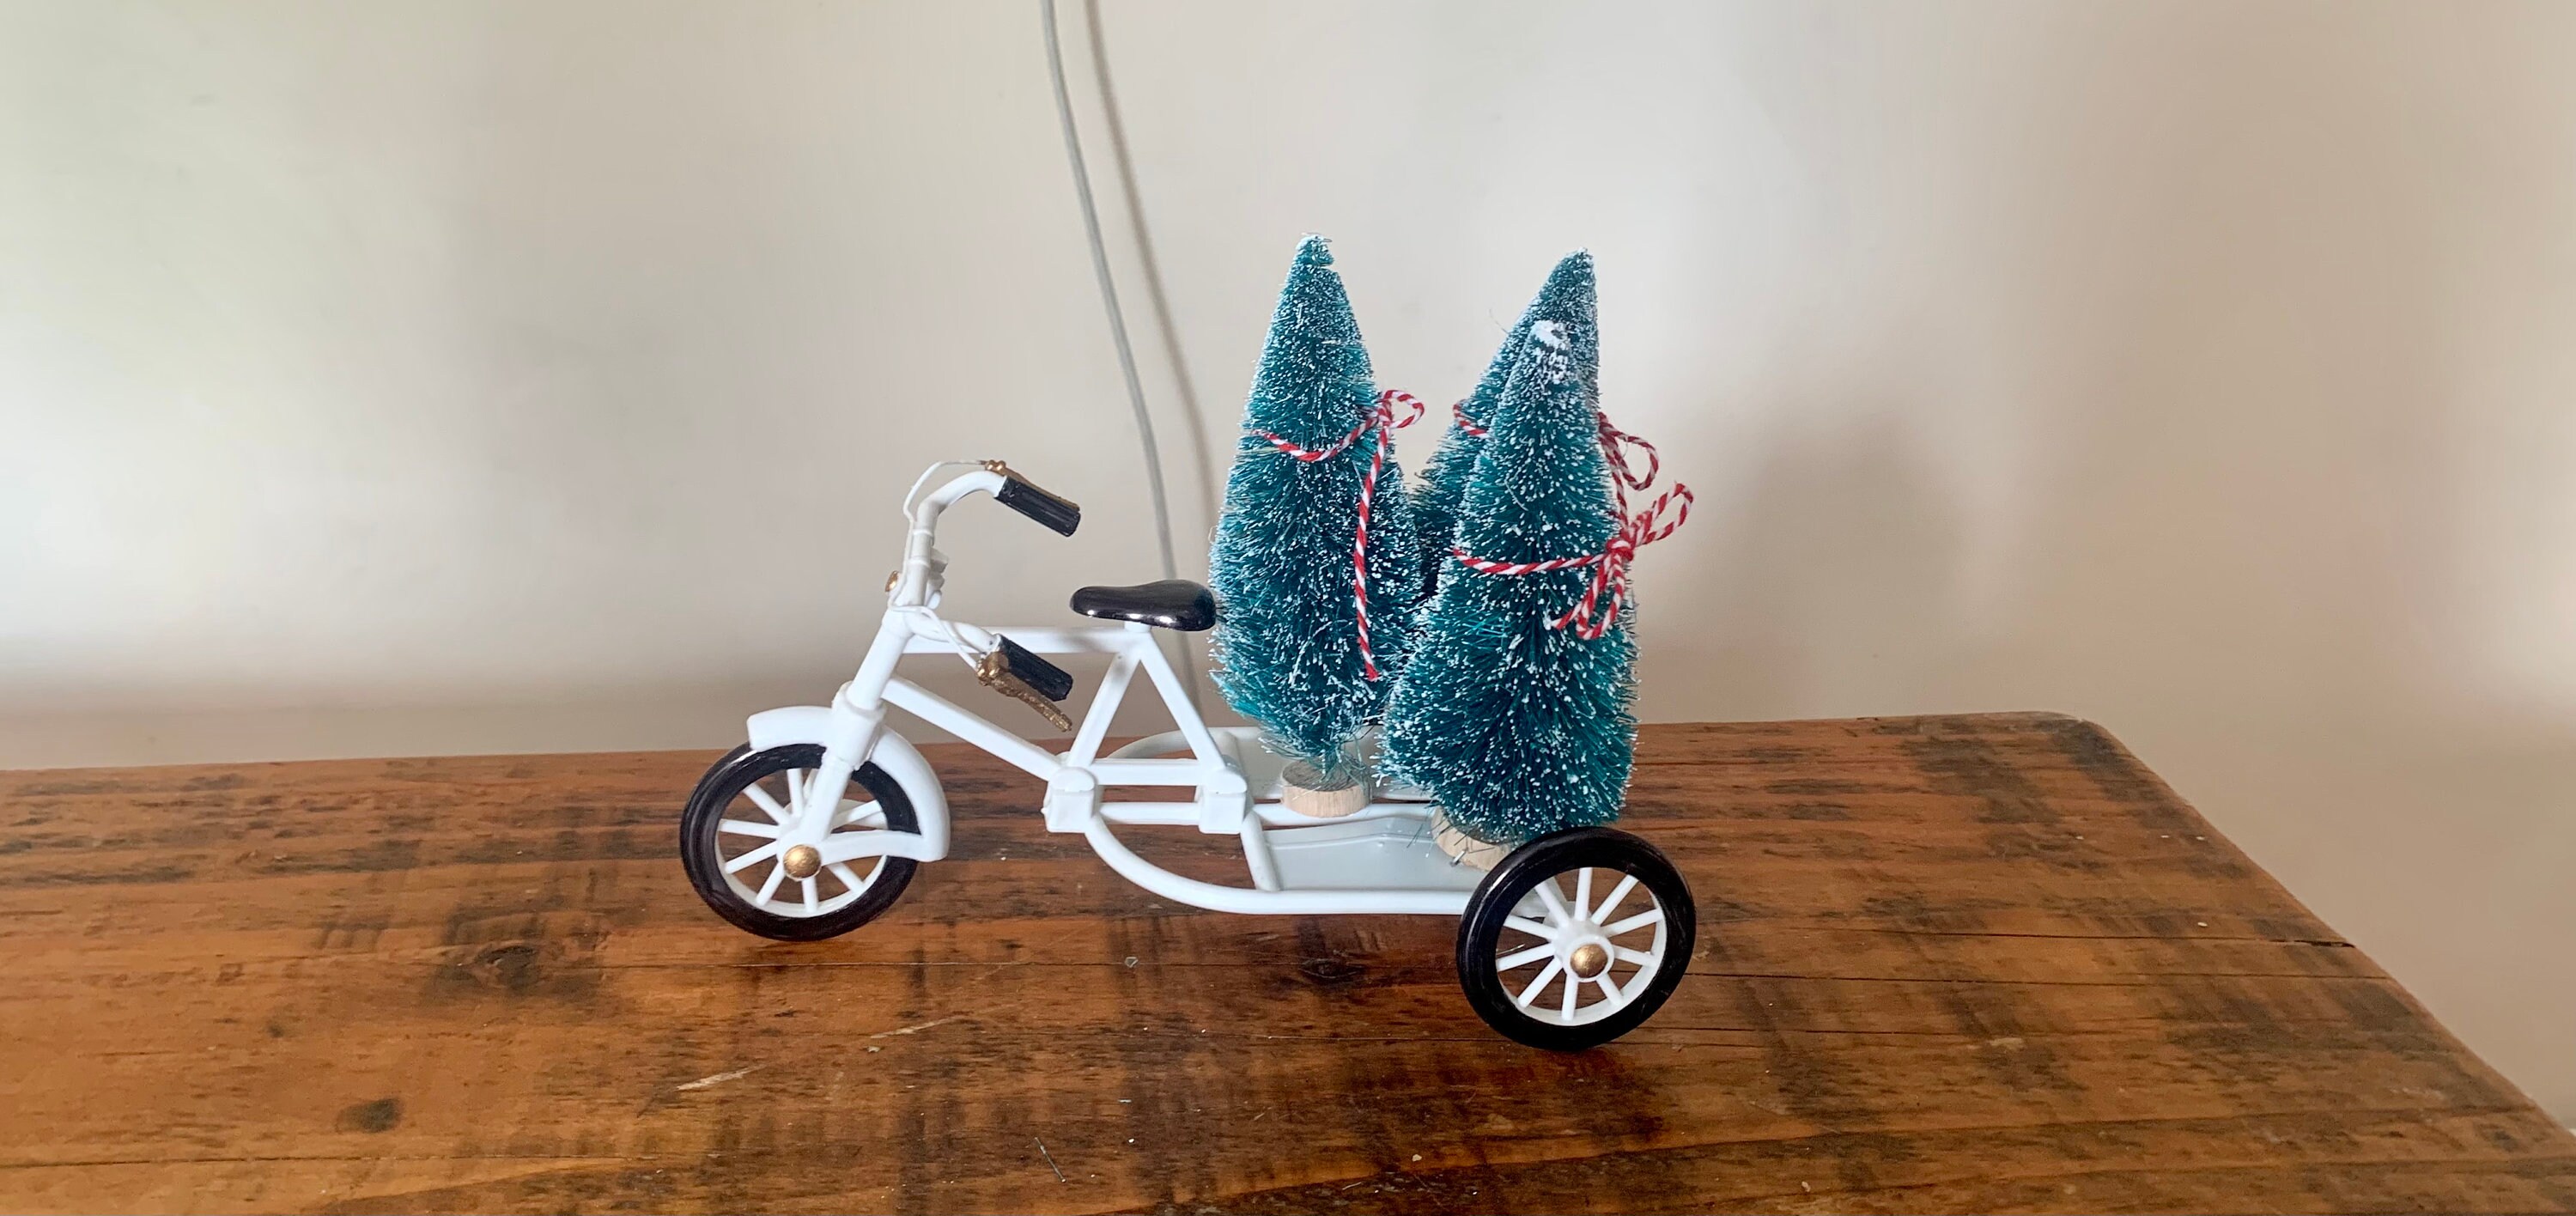 Vélo miniature tricycle